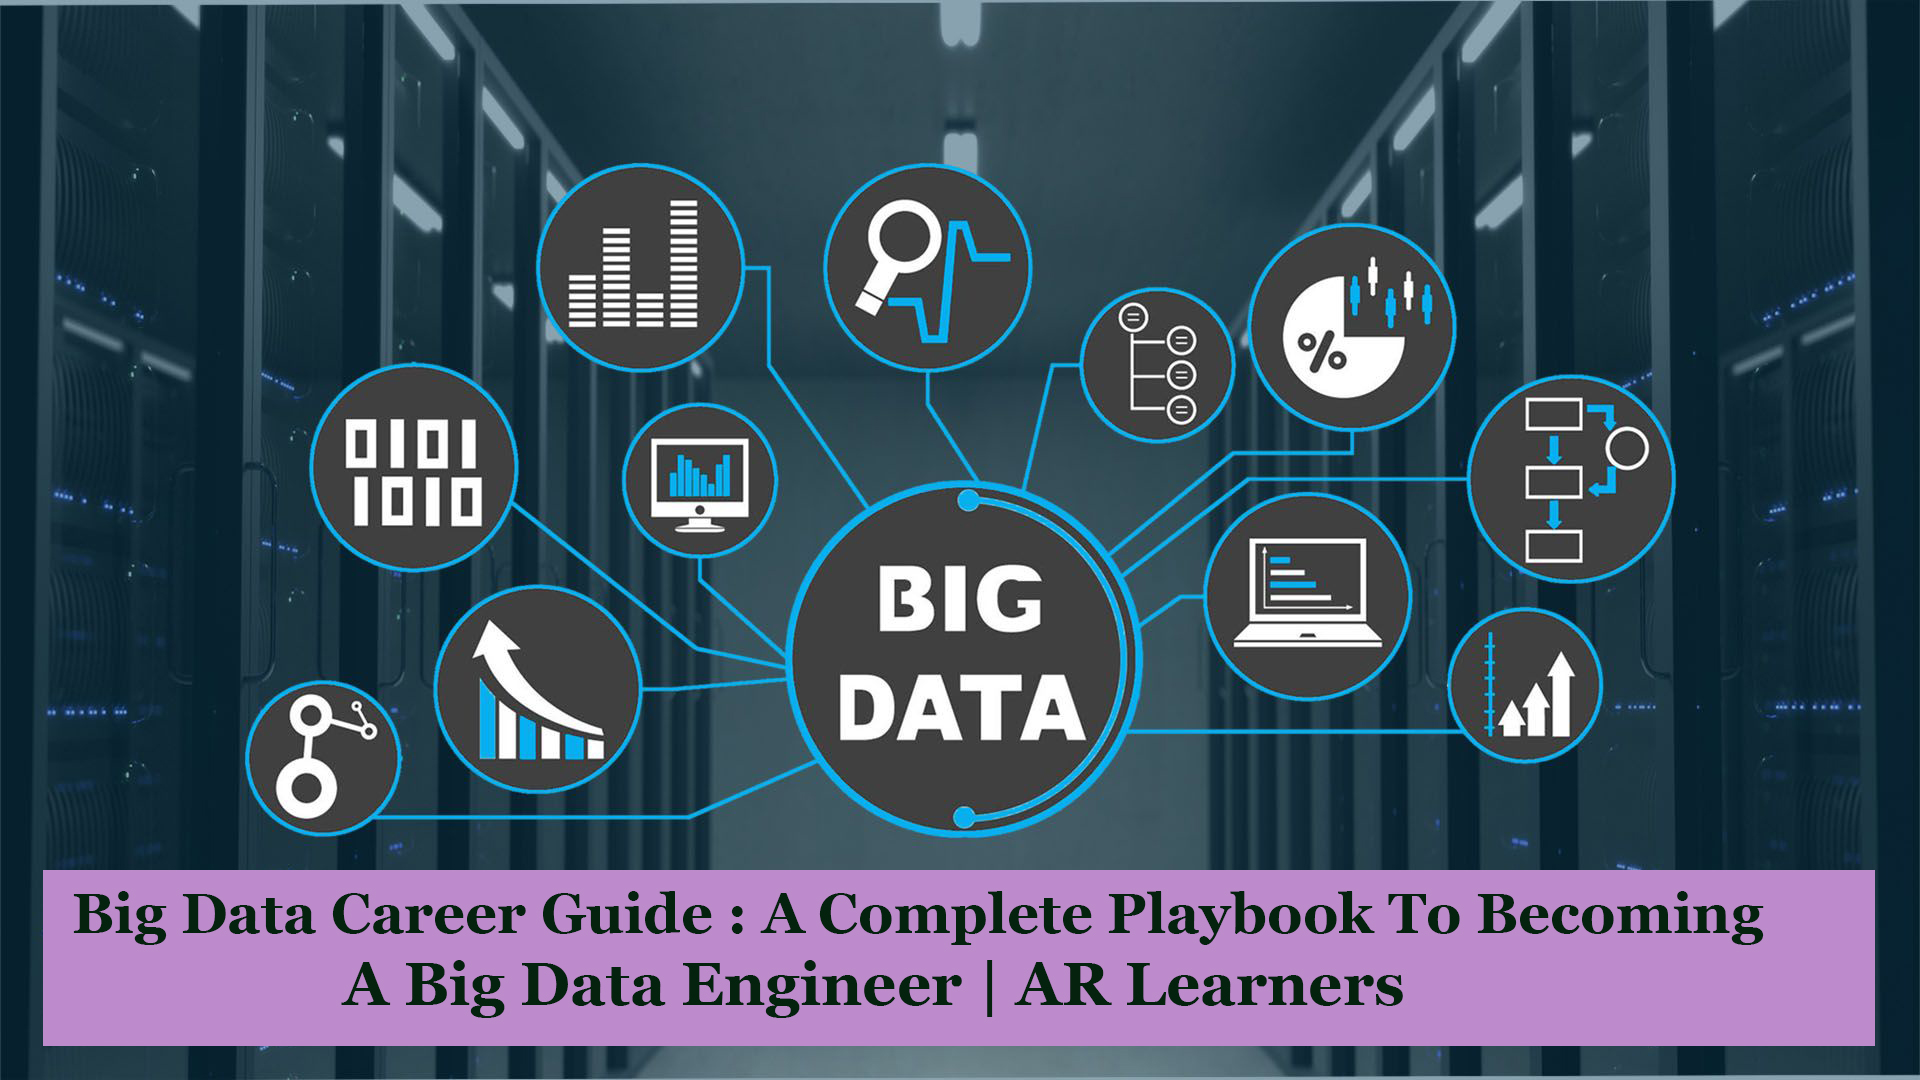 Big Data Career Guide A Complete Playbook To Becoming A Big Data Engineer AR Learners